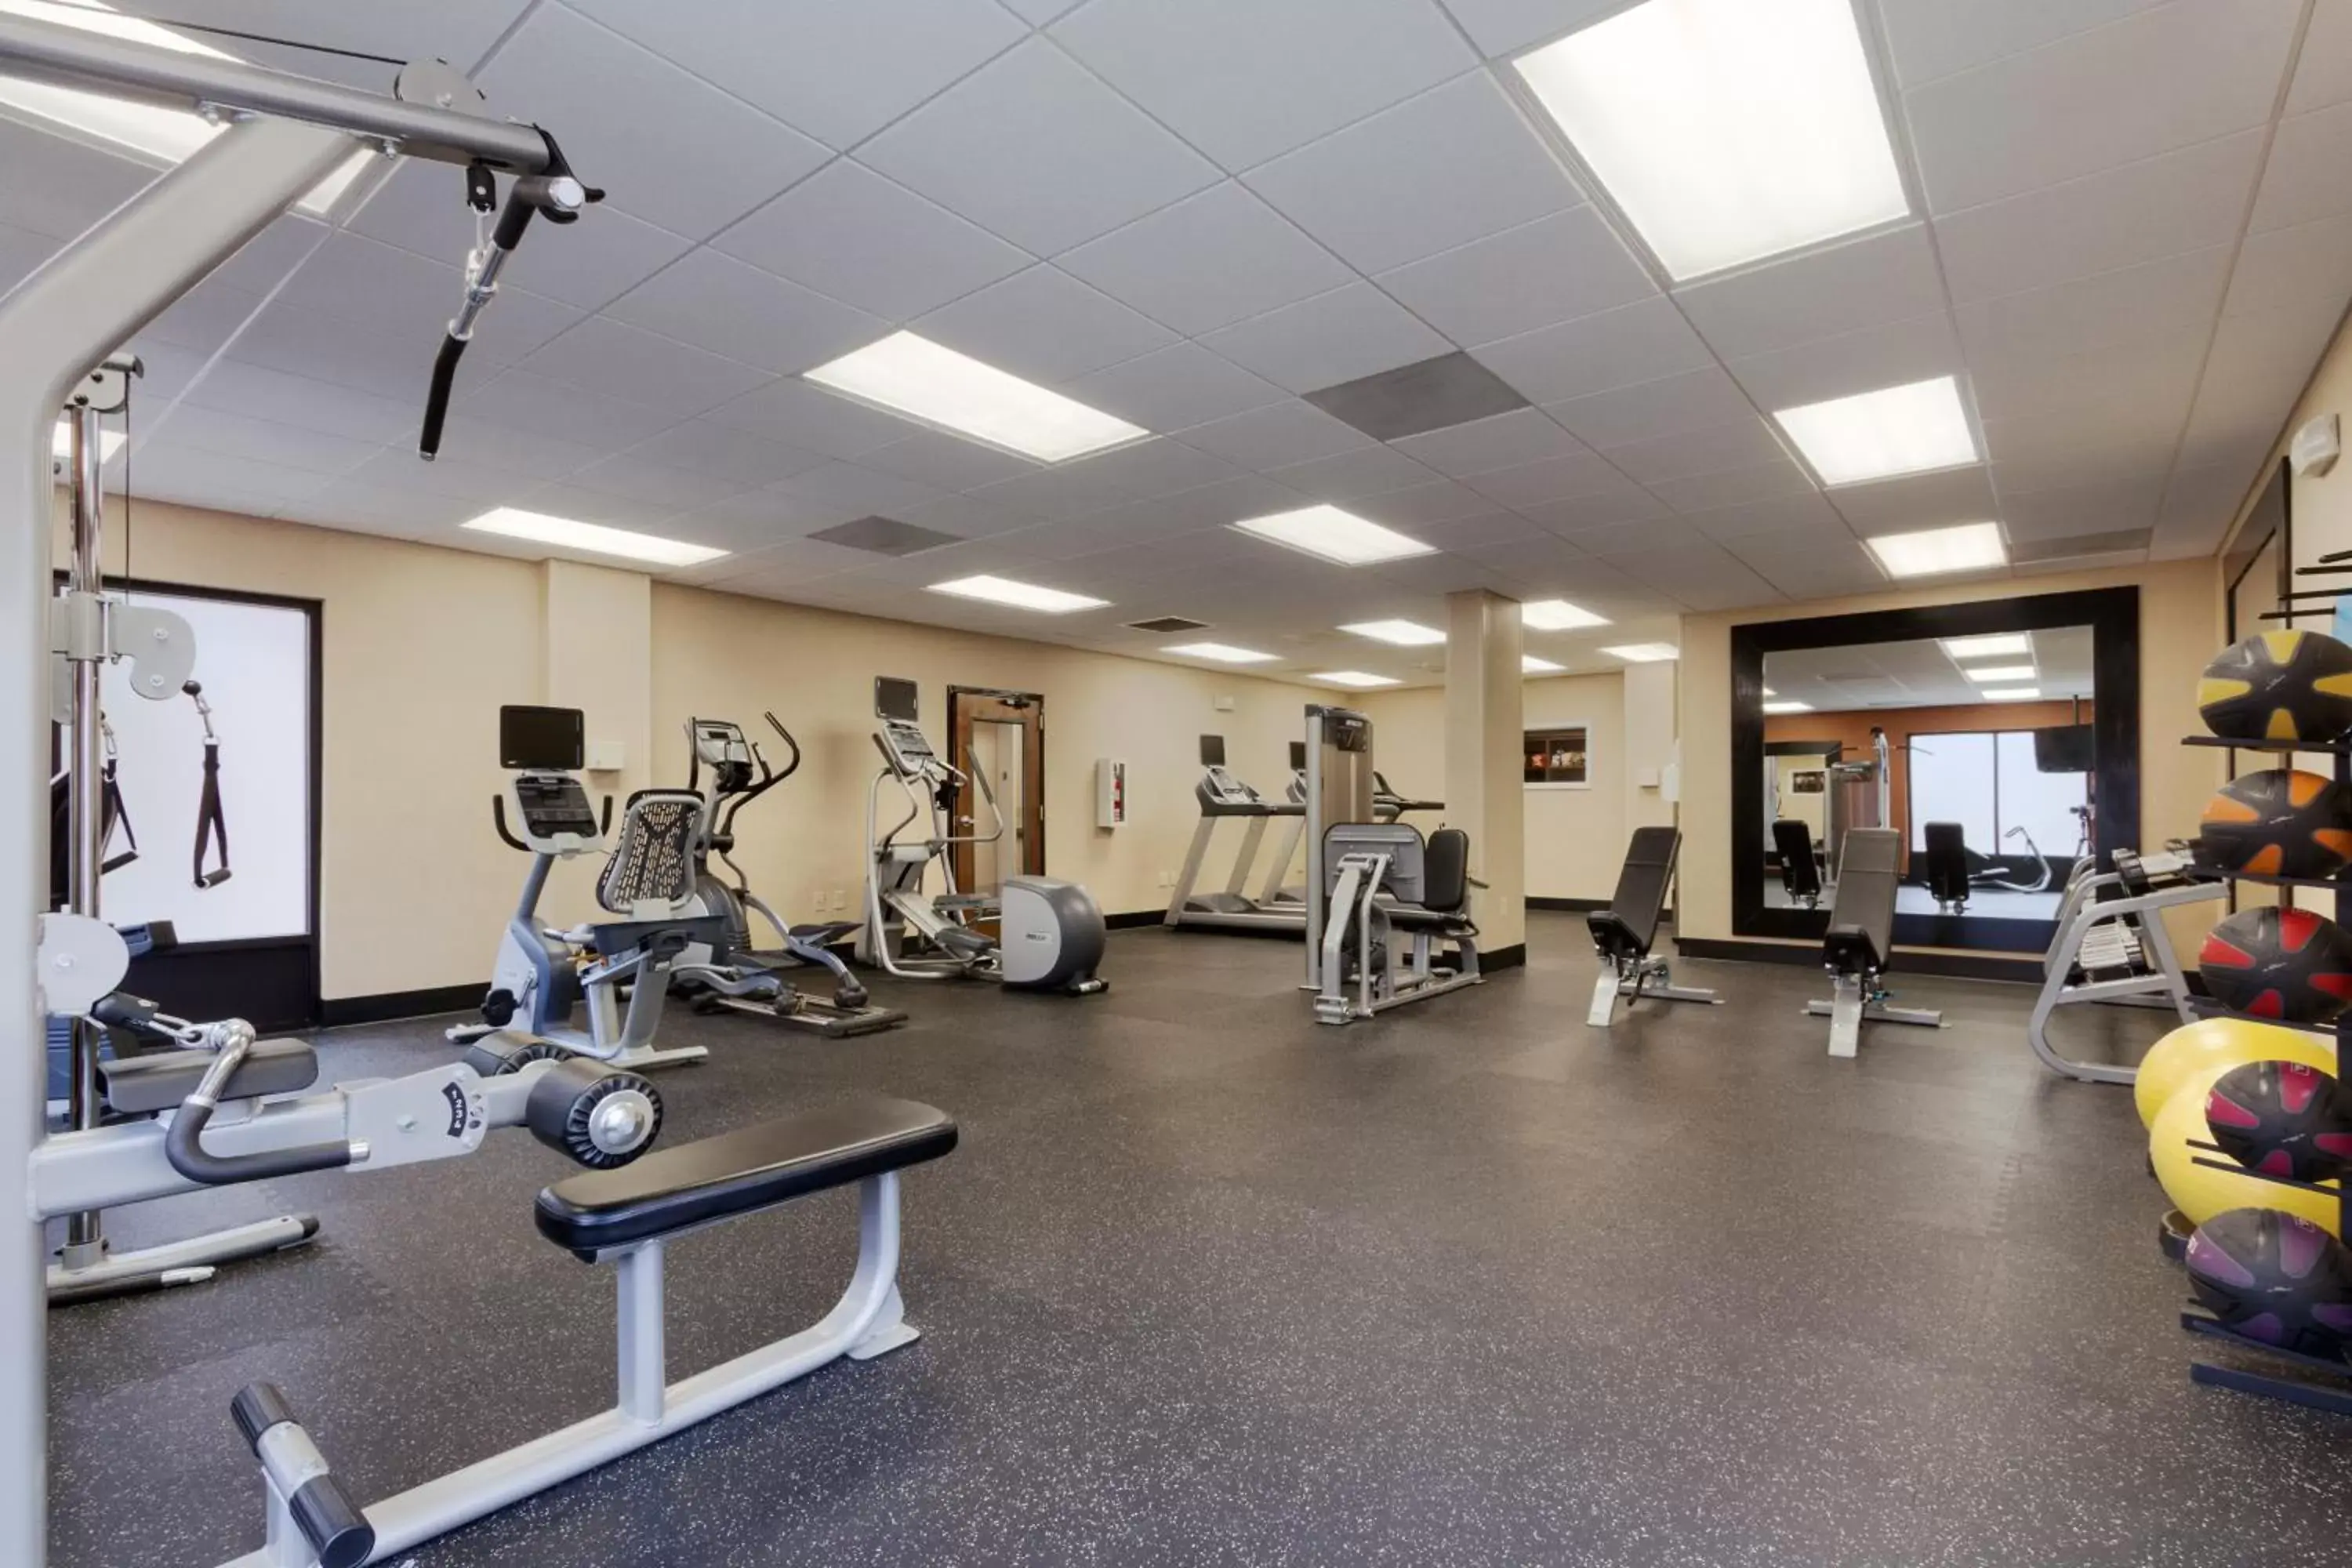 Fitness centre/facilities, Fitness Center/Facilities in Wingate by Wyndham - Charlotte Airport South I-77 at Tyvola